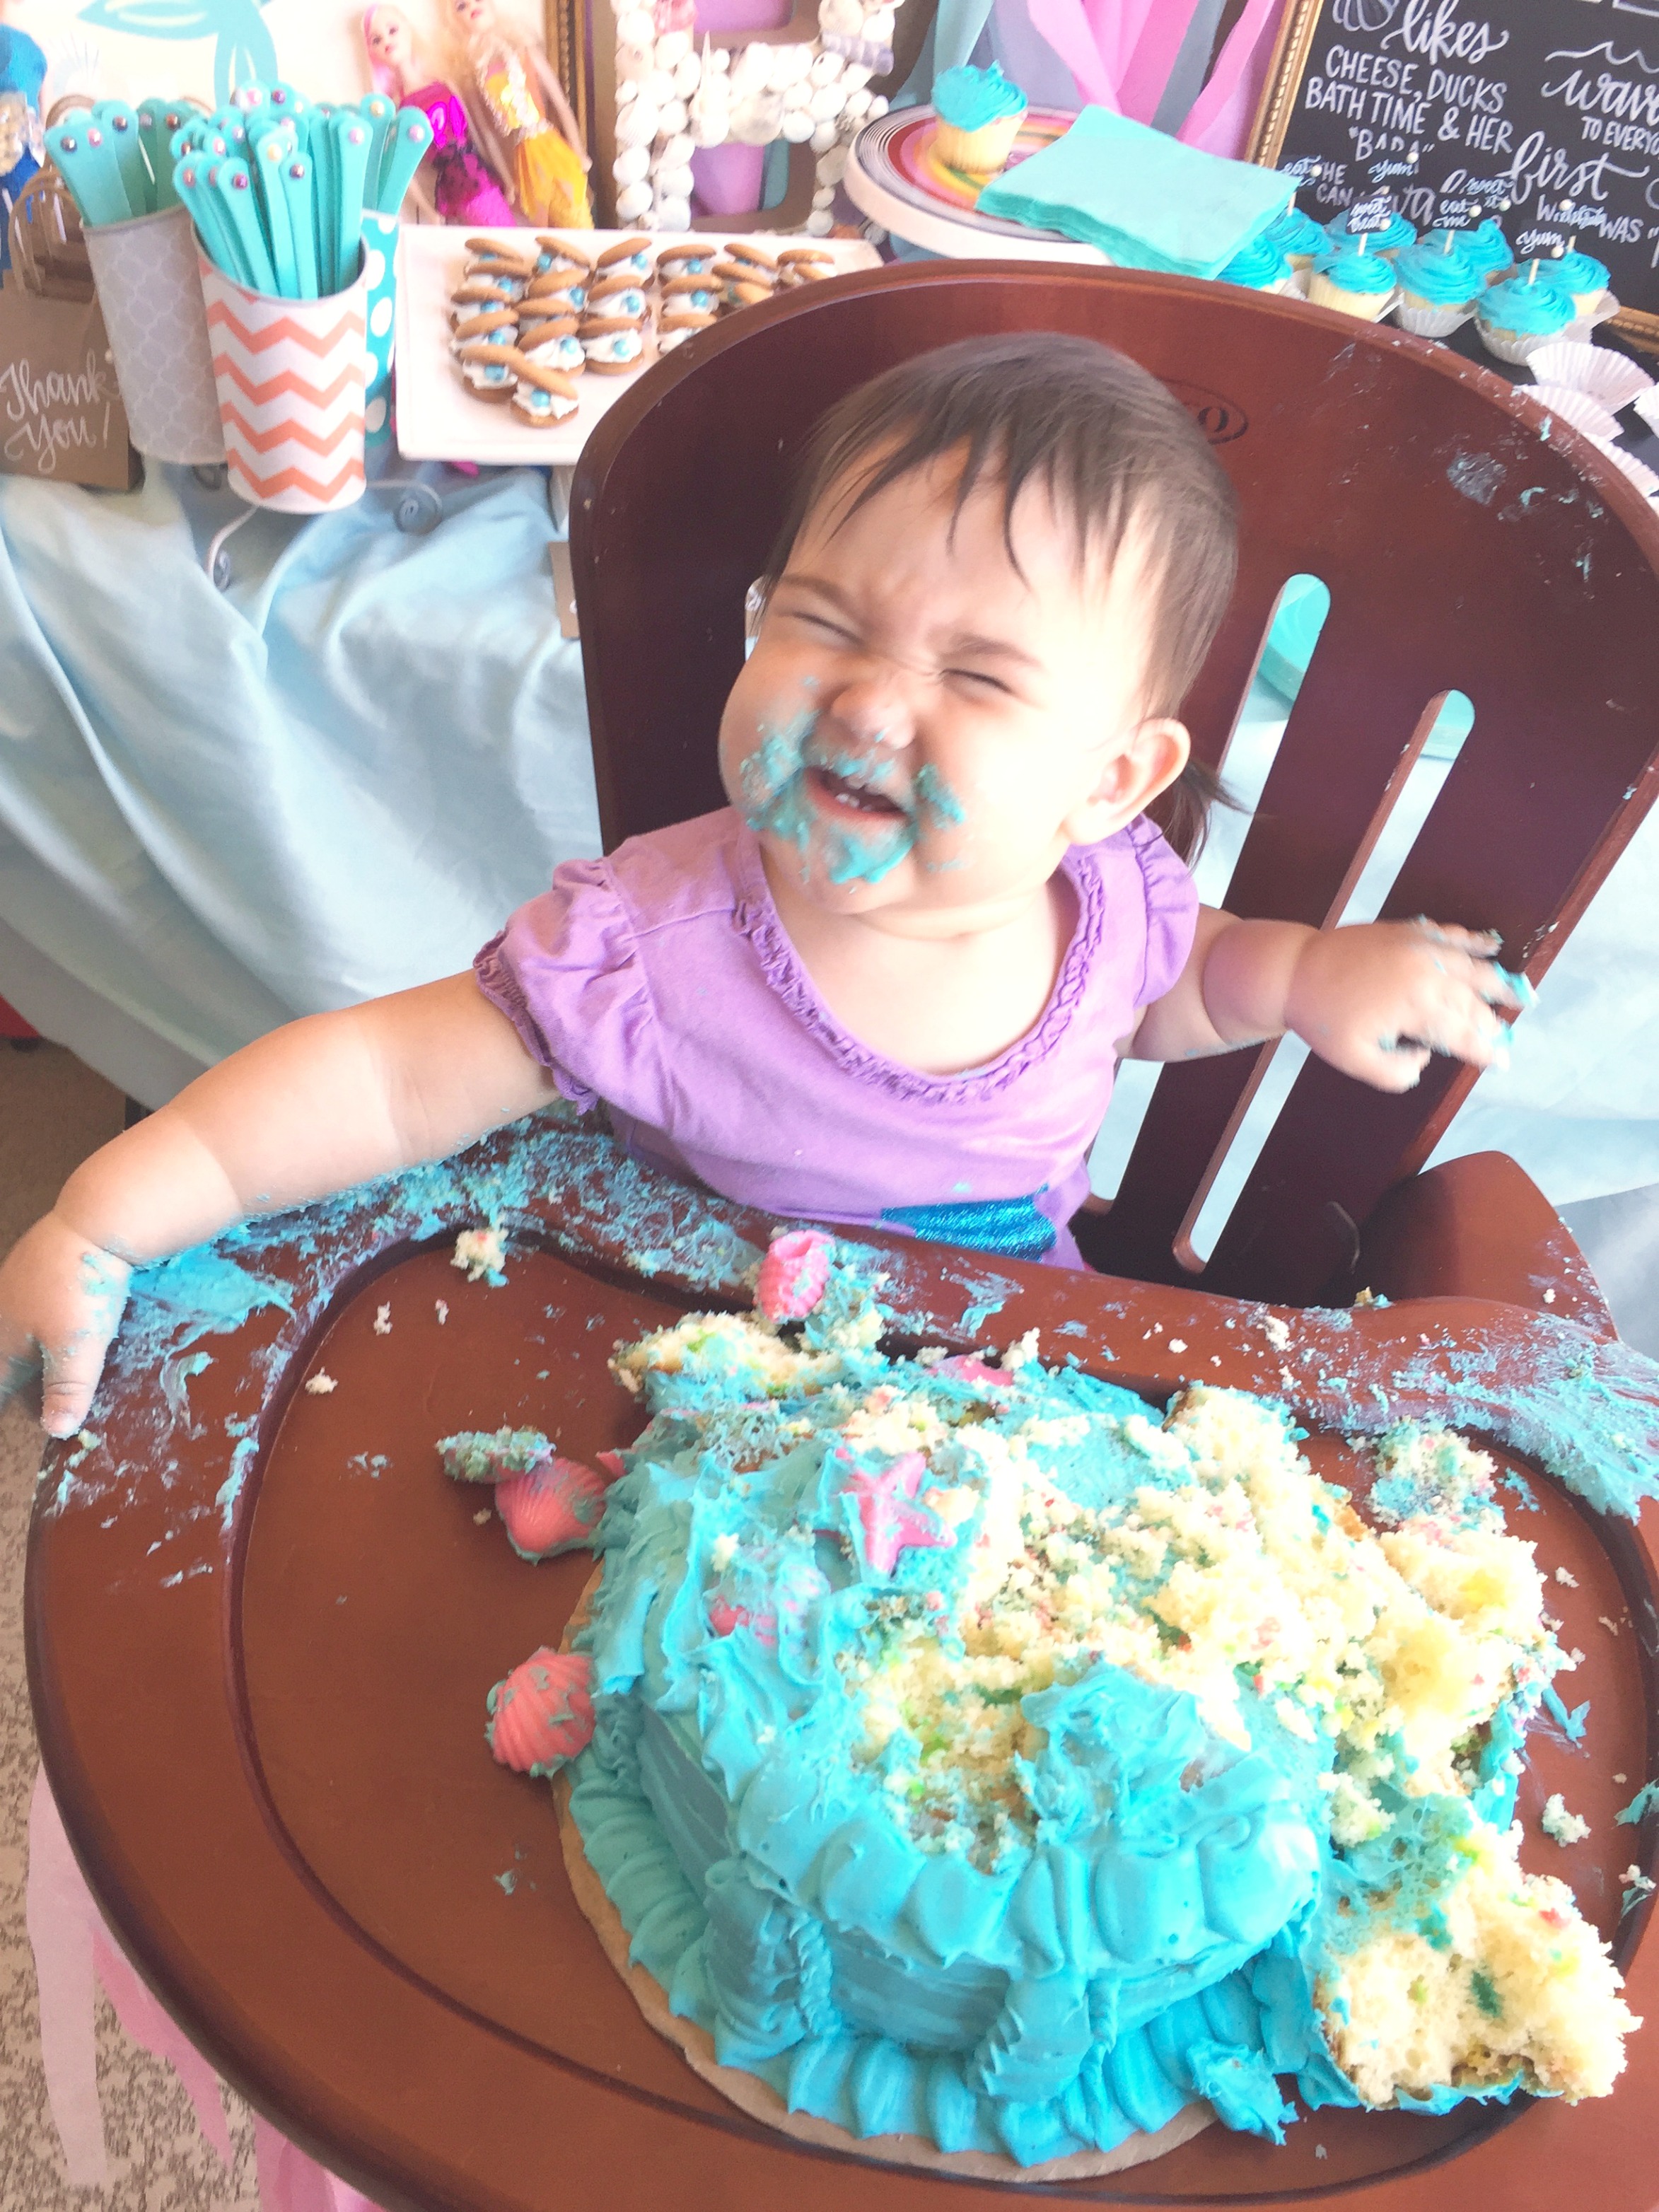 See how we celebrated my daughter's birthday with a First Birthday Mermaid Party. The whimsical pink and turquoise theme was further embellished by pearls.